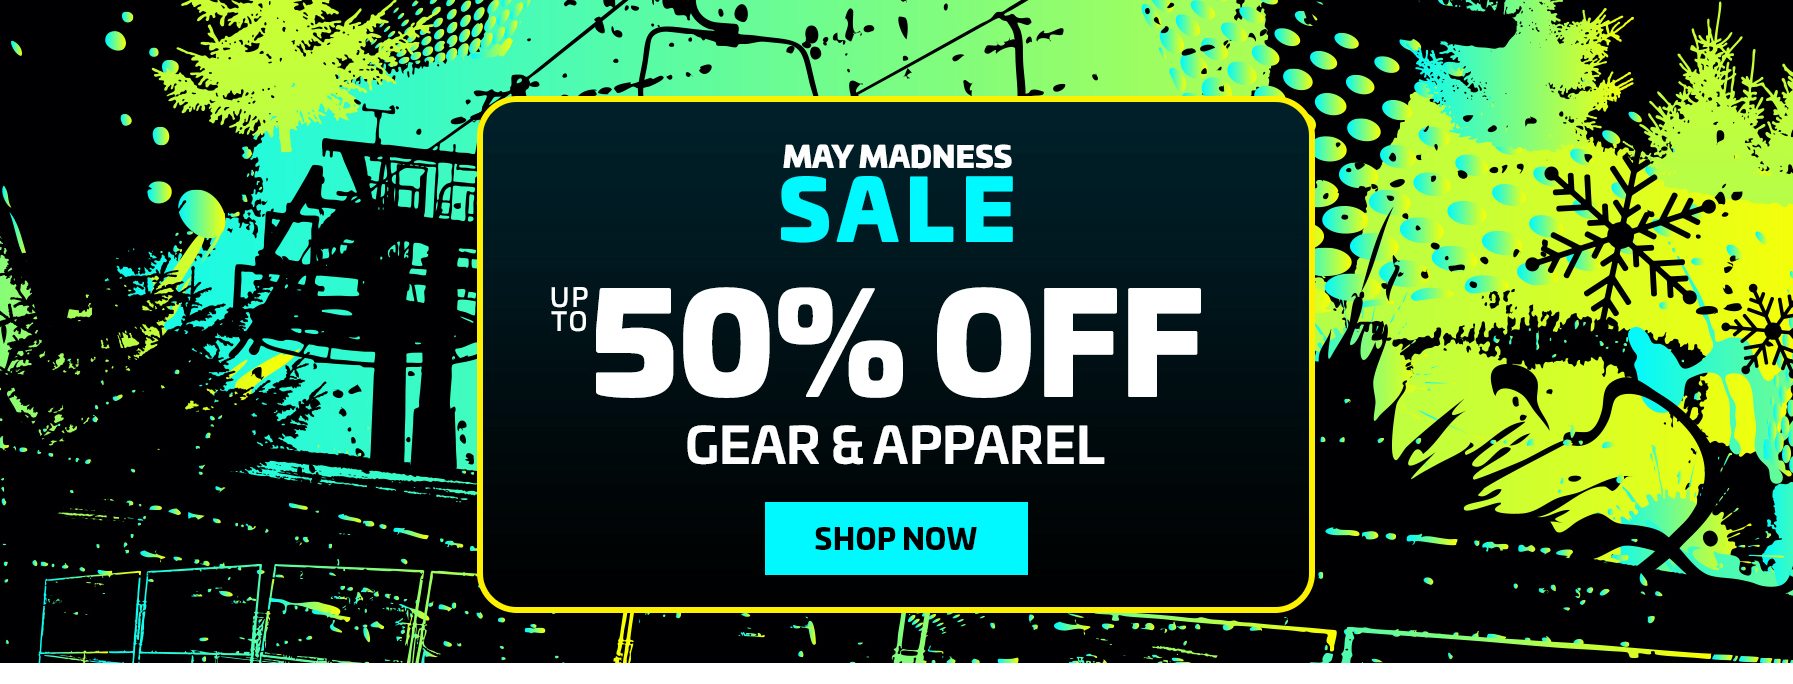 MAY MADNESS SALE FOOTER